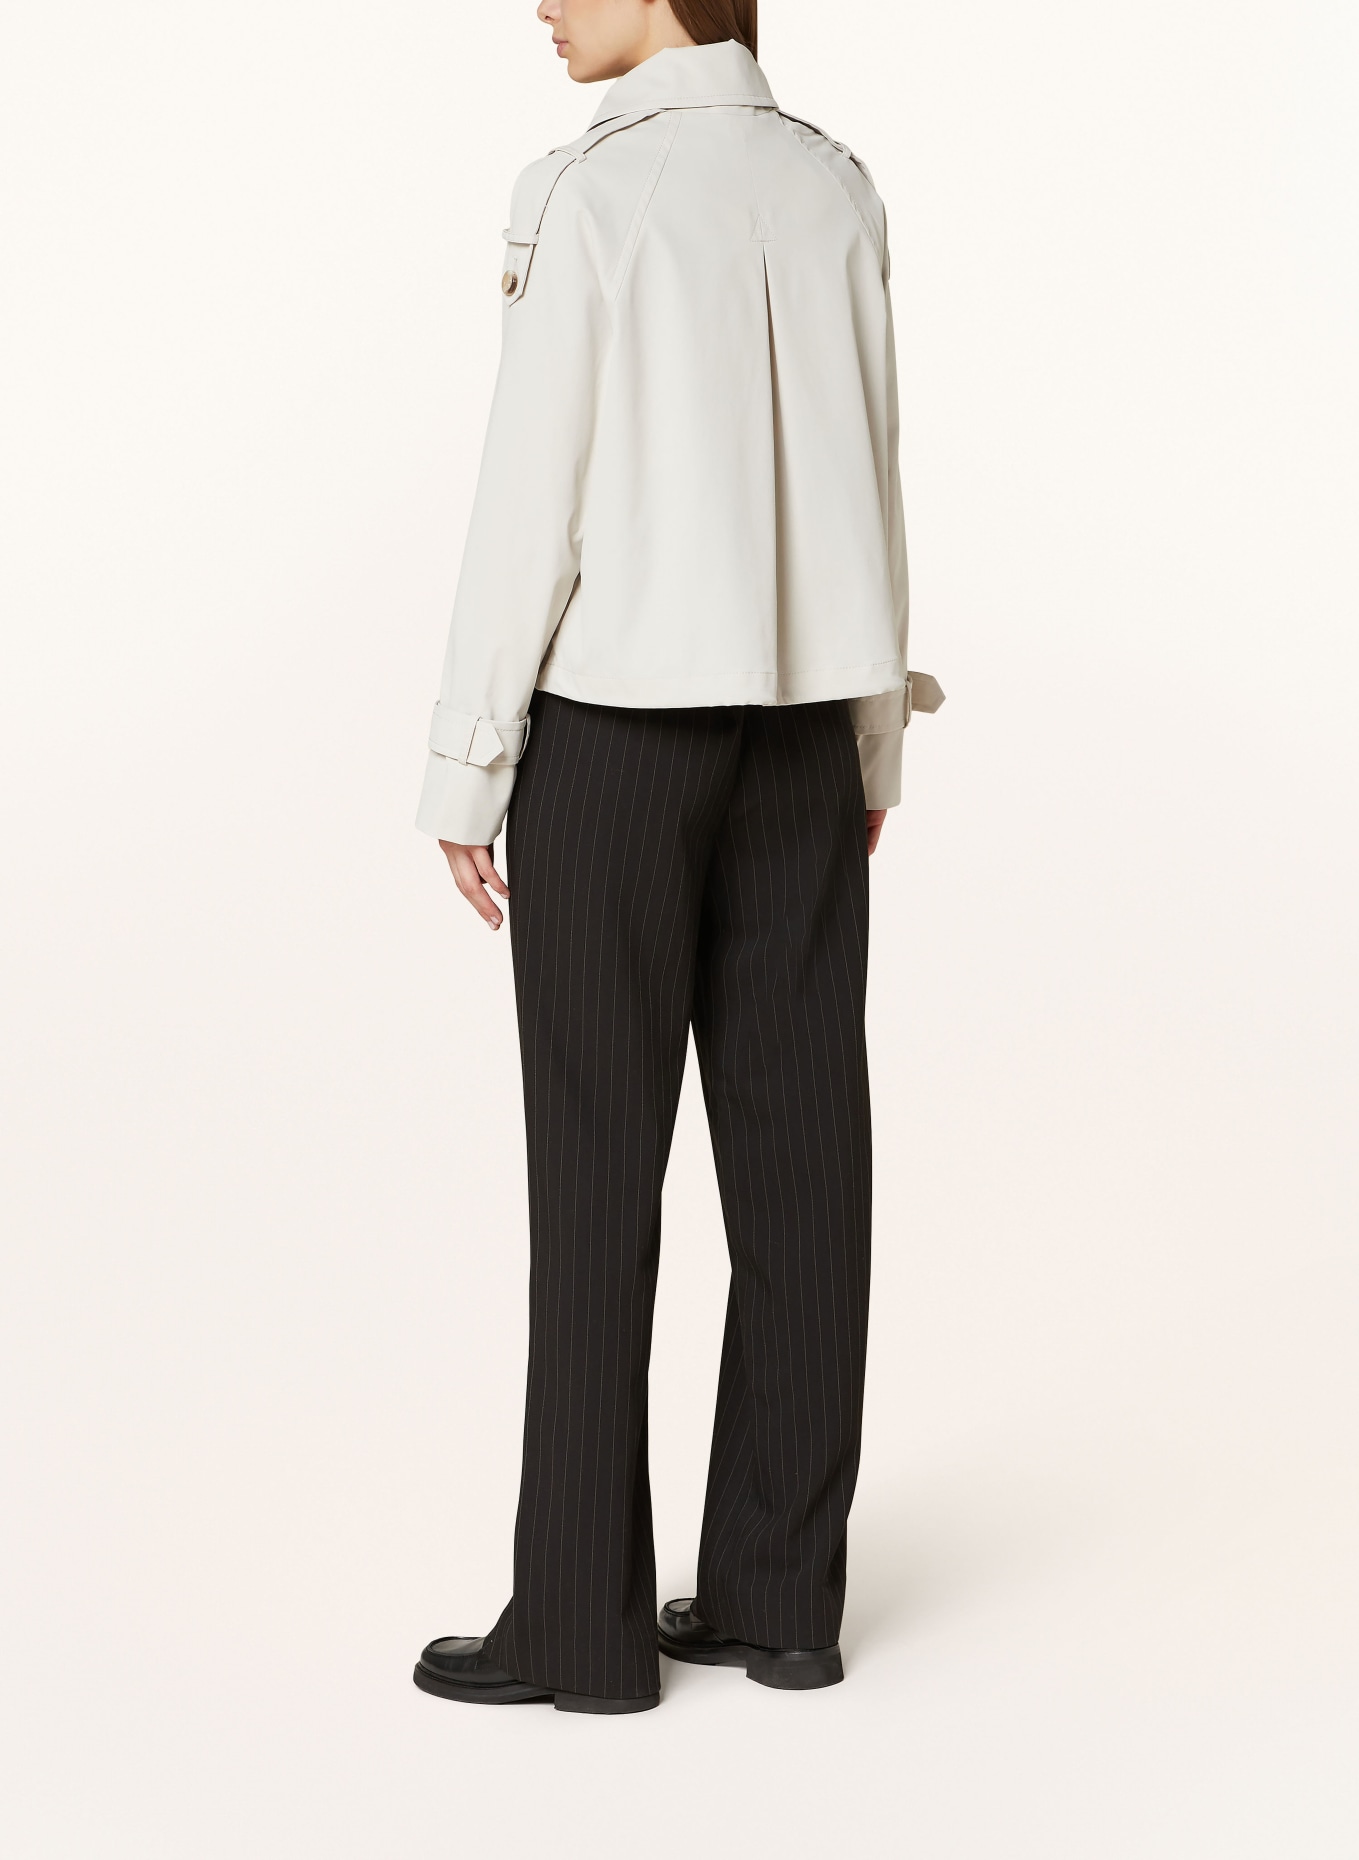 BEAUMONT Trench coat FAY, Color: CREAM (Image 3)